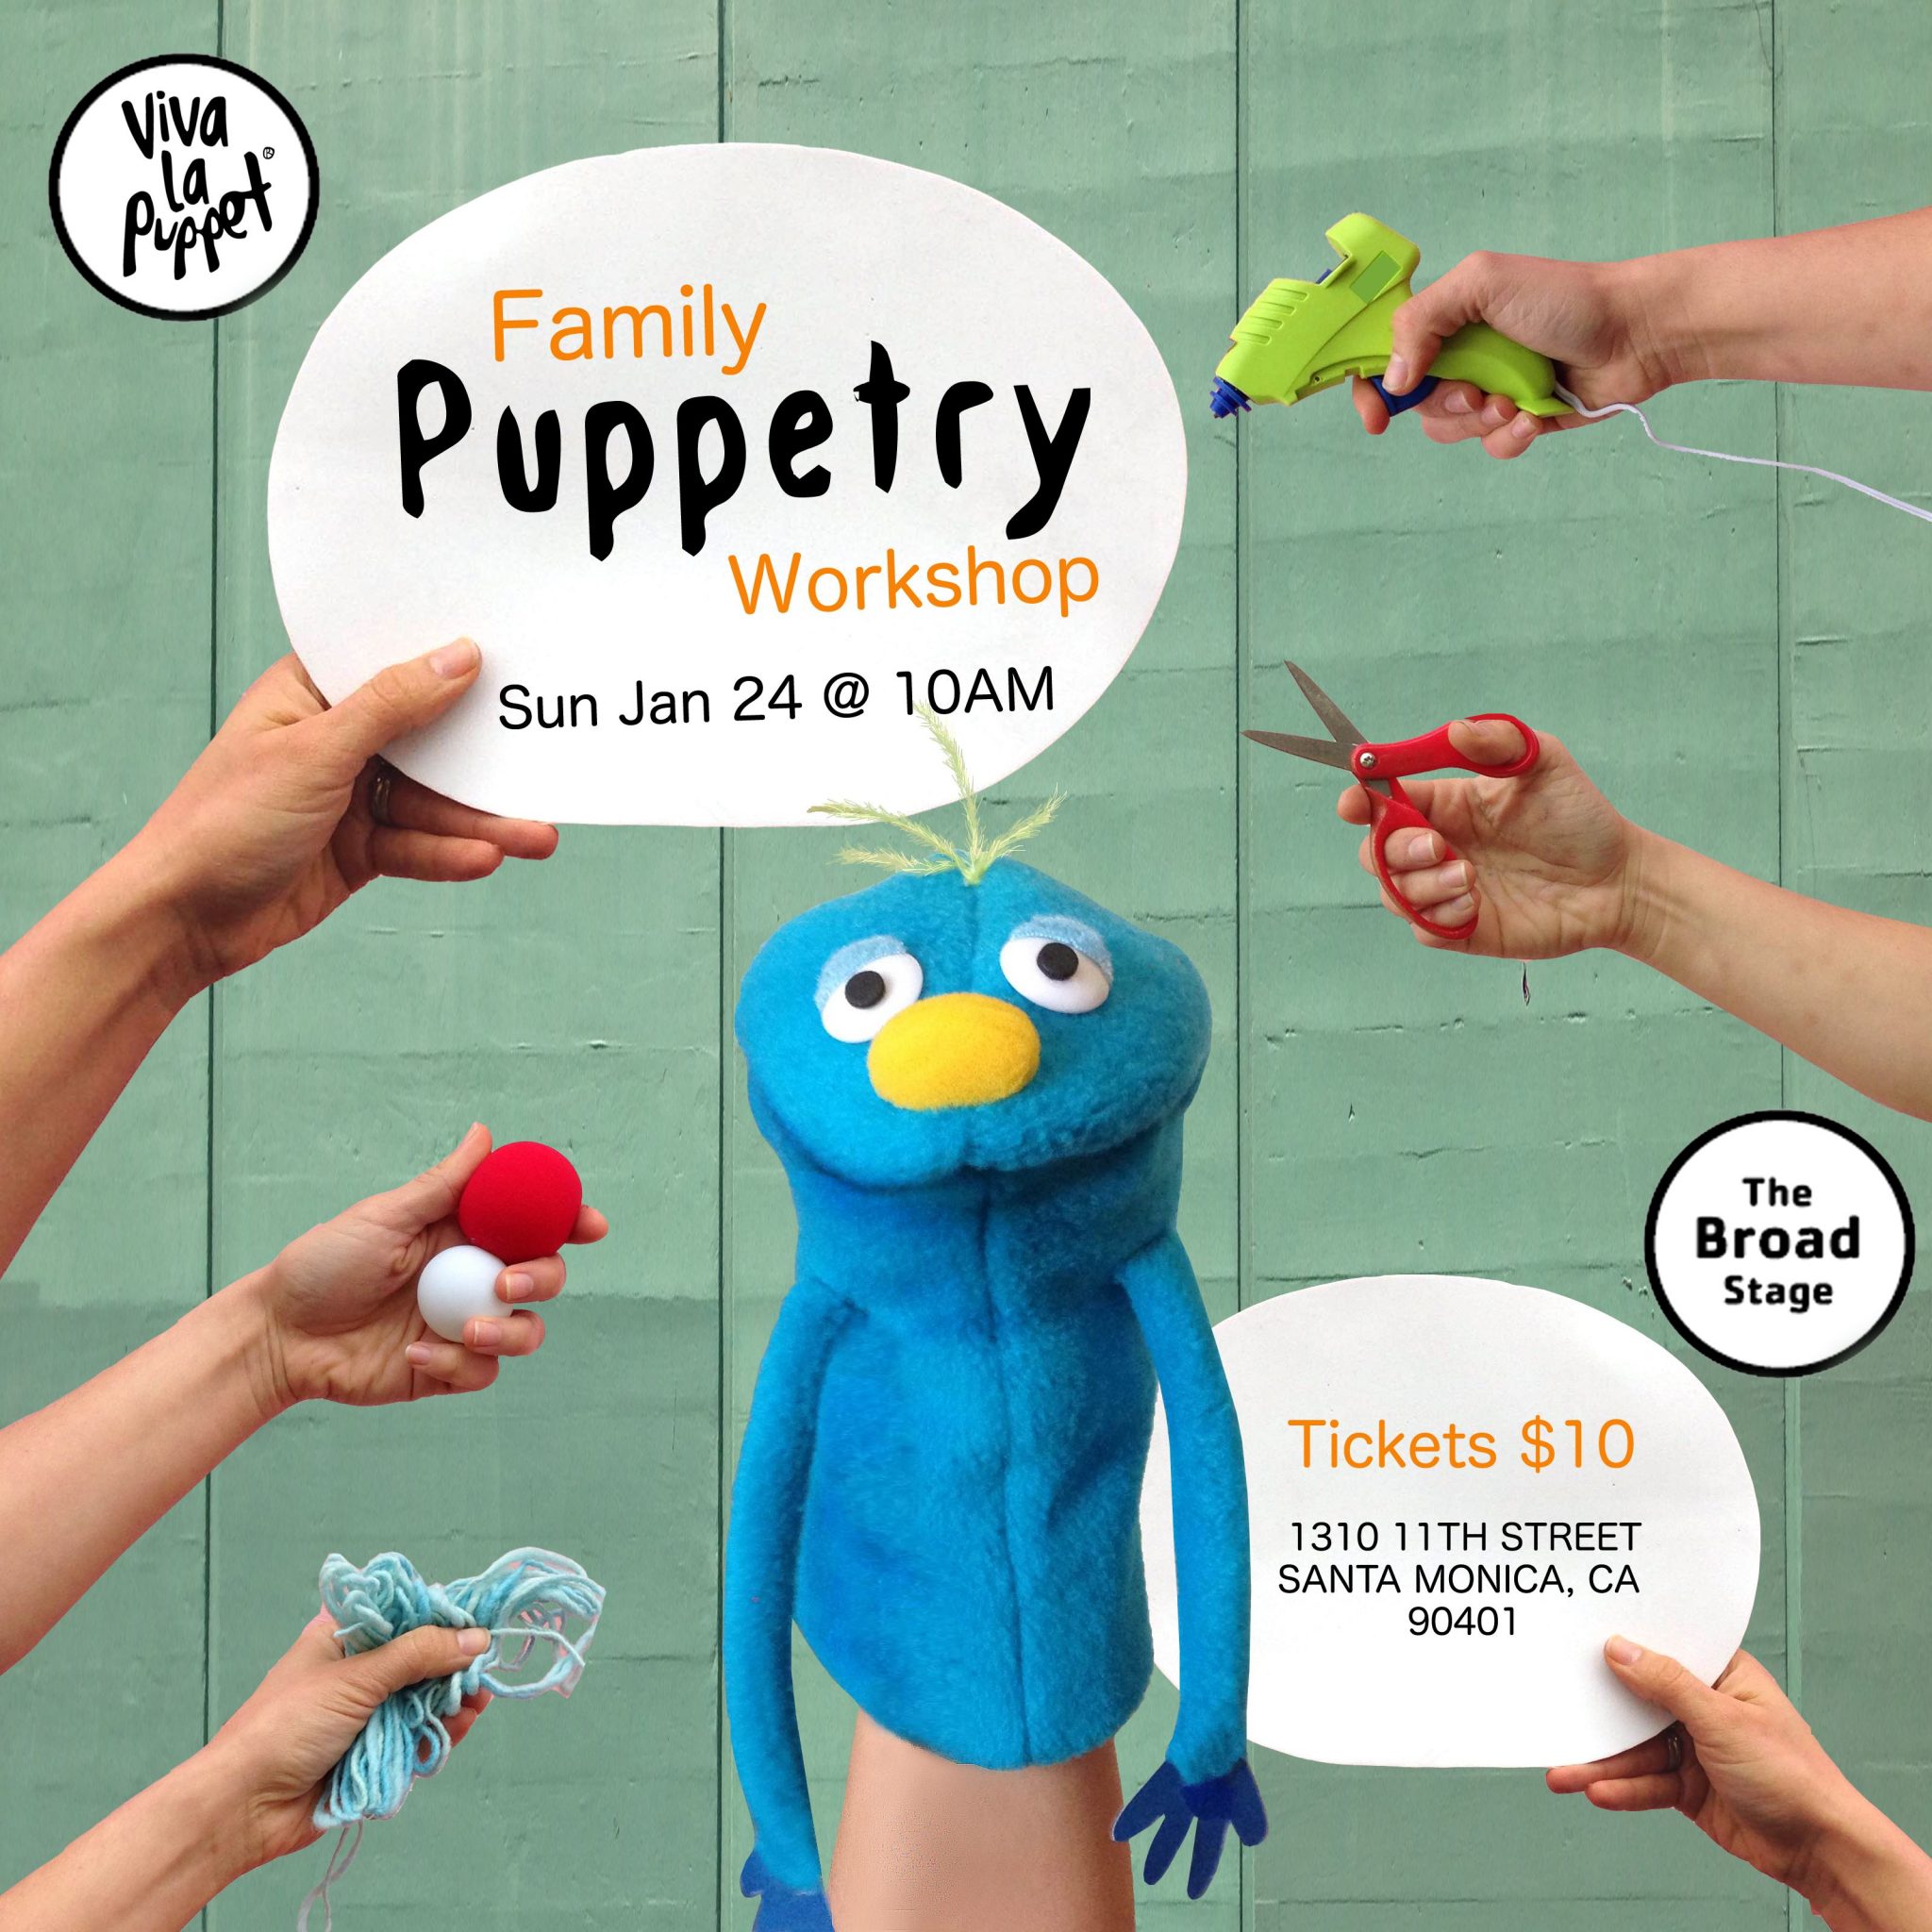 Family Puppetry Workshop - The Broad Stage